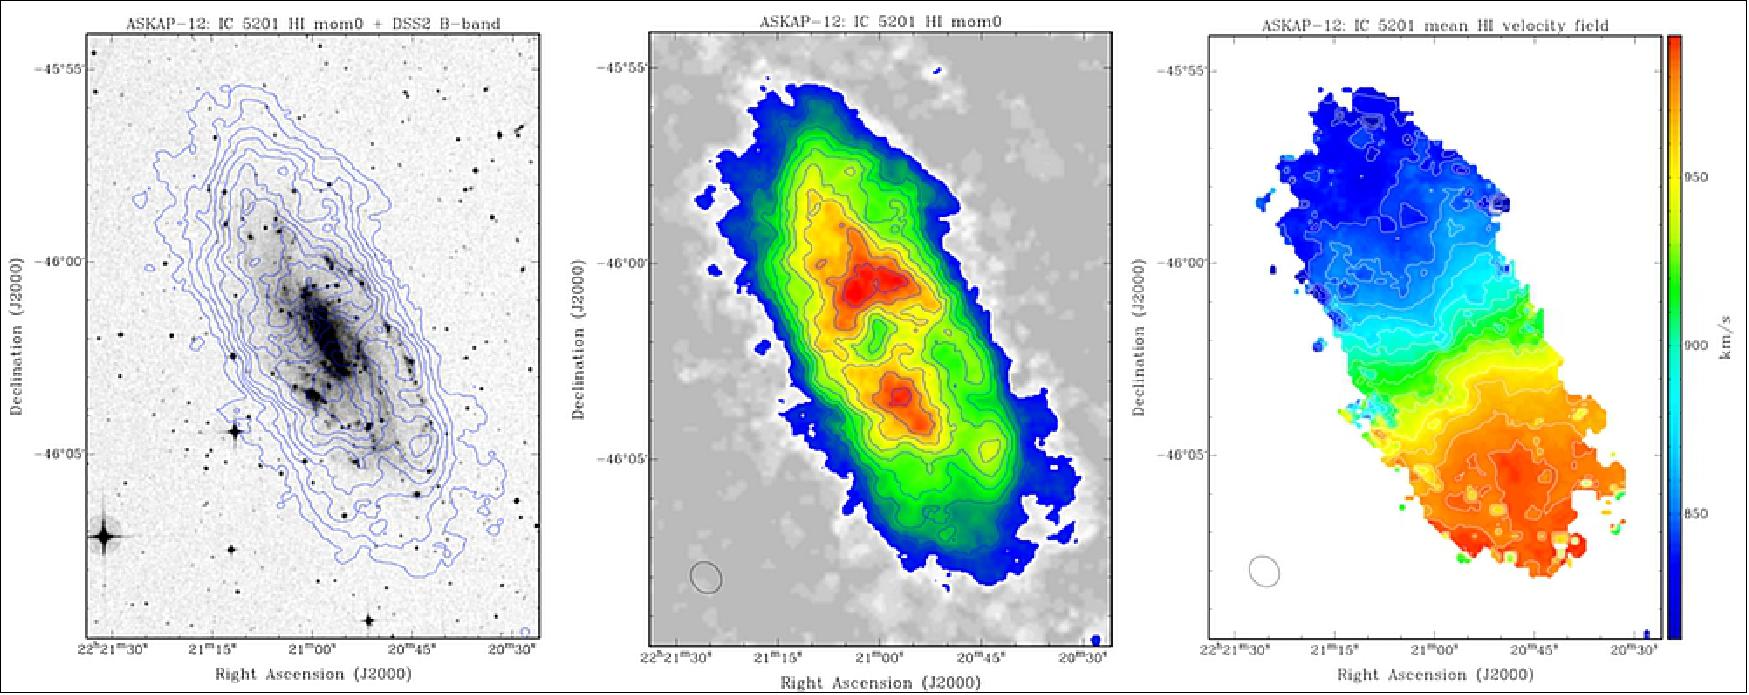 Figure 58: Neutral hydrogen gas in one of the galaxies, IC 5201 in the southern constellation of Grus (The Crane), imaged in early observations for the WALLABY project (image credit: CSIRO, Matthew Whiting, Karen Lee-Waddell and Bärbel Koribalski, all of WALLABY)